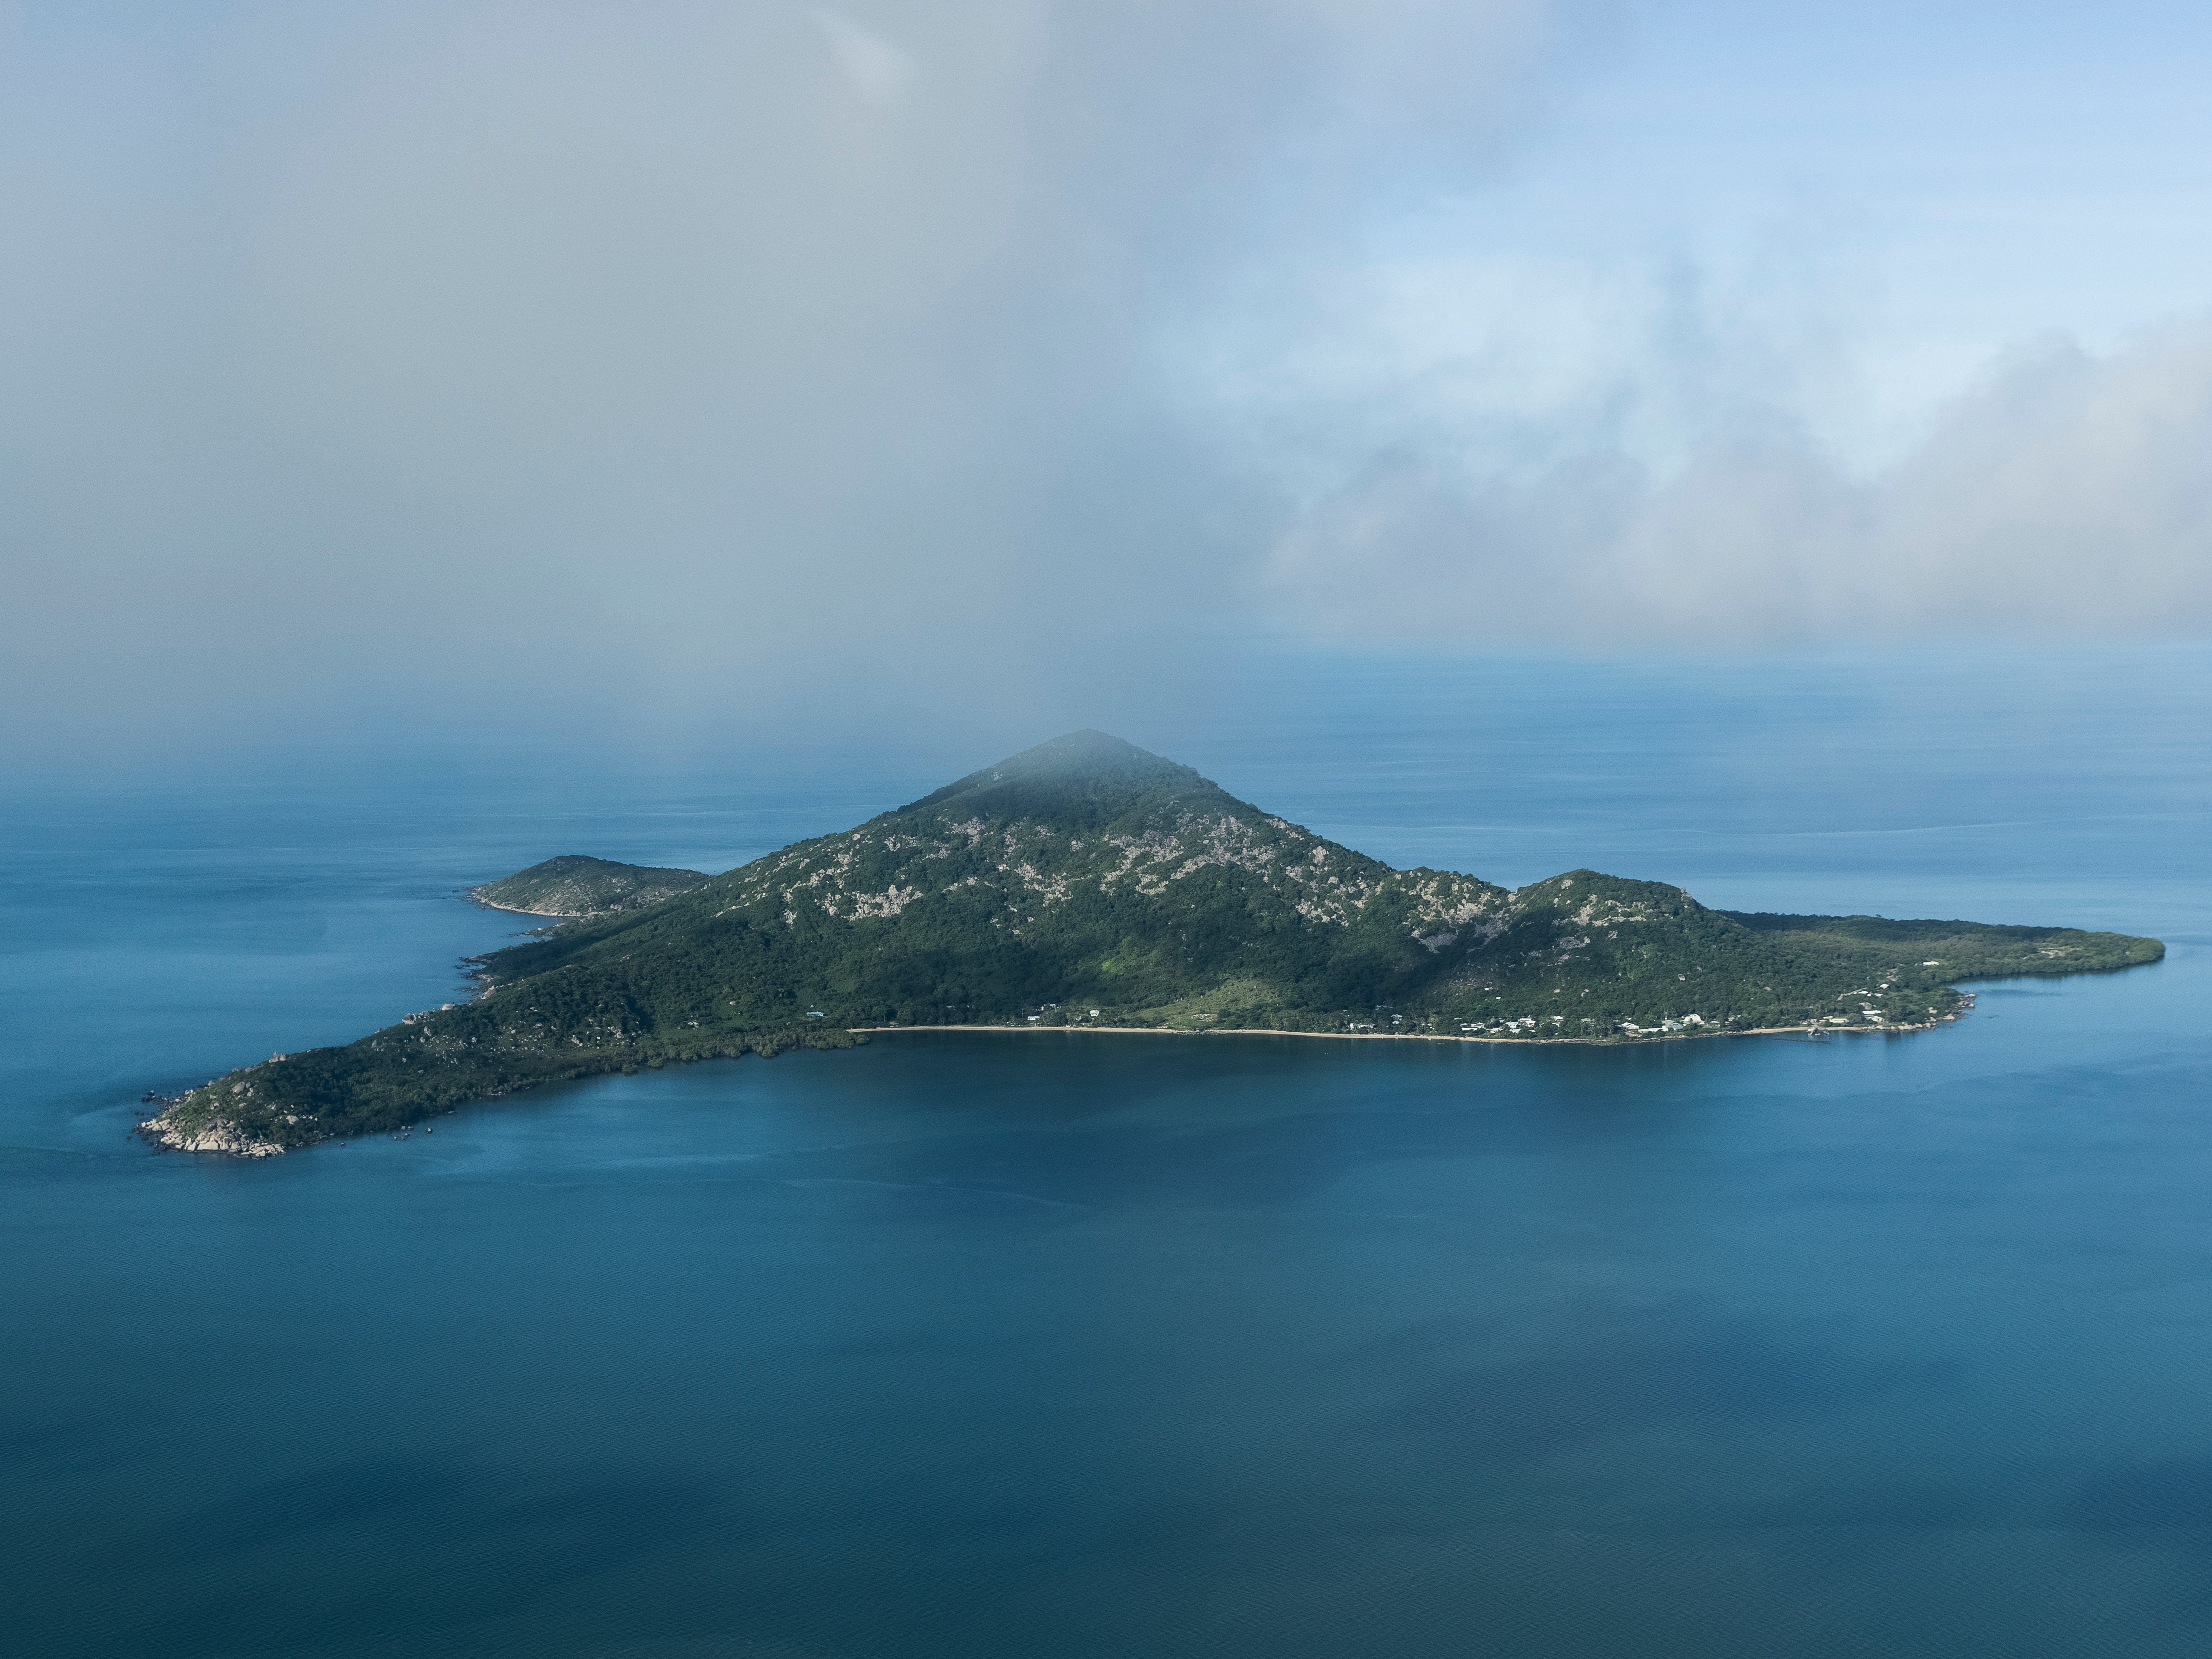 Dauan Island is among the Torres Strait islands suffering with rising sea levels